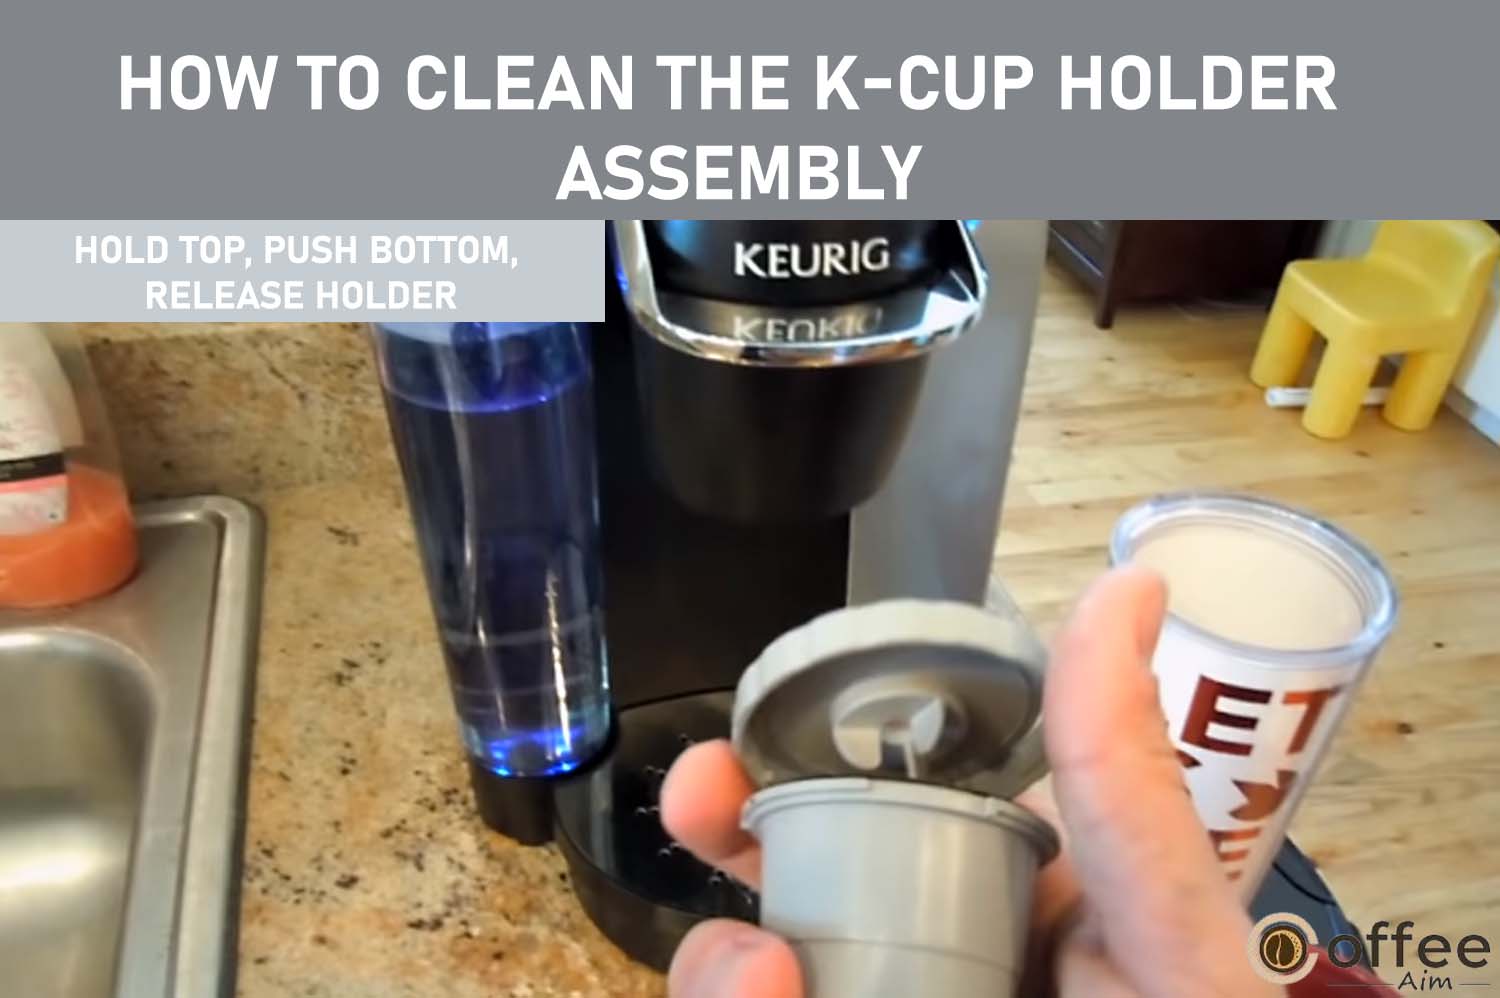 To release the K-Cup Holder Assembly, hold the top of the holder with one hand while pushing up from the bottom with the other hand until it detaches.